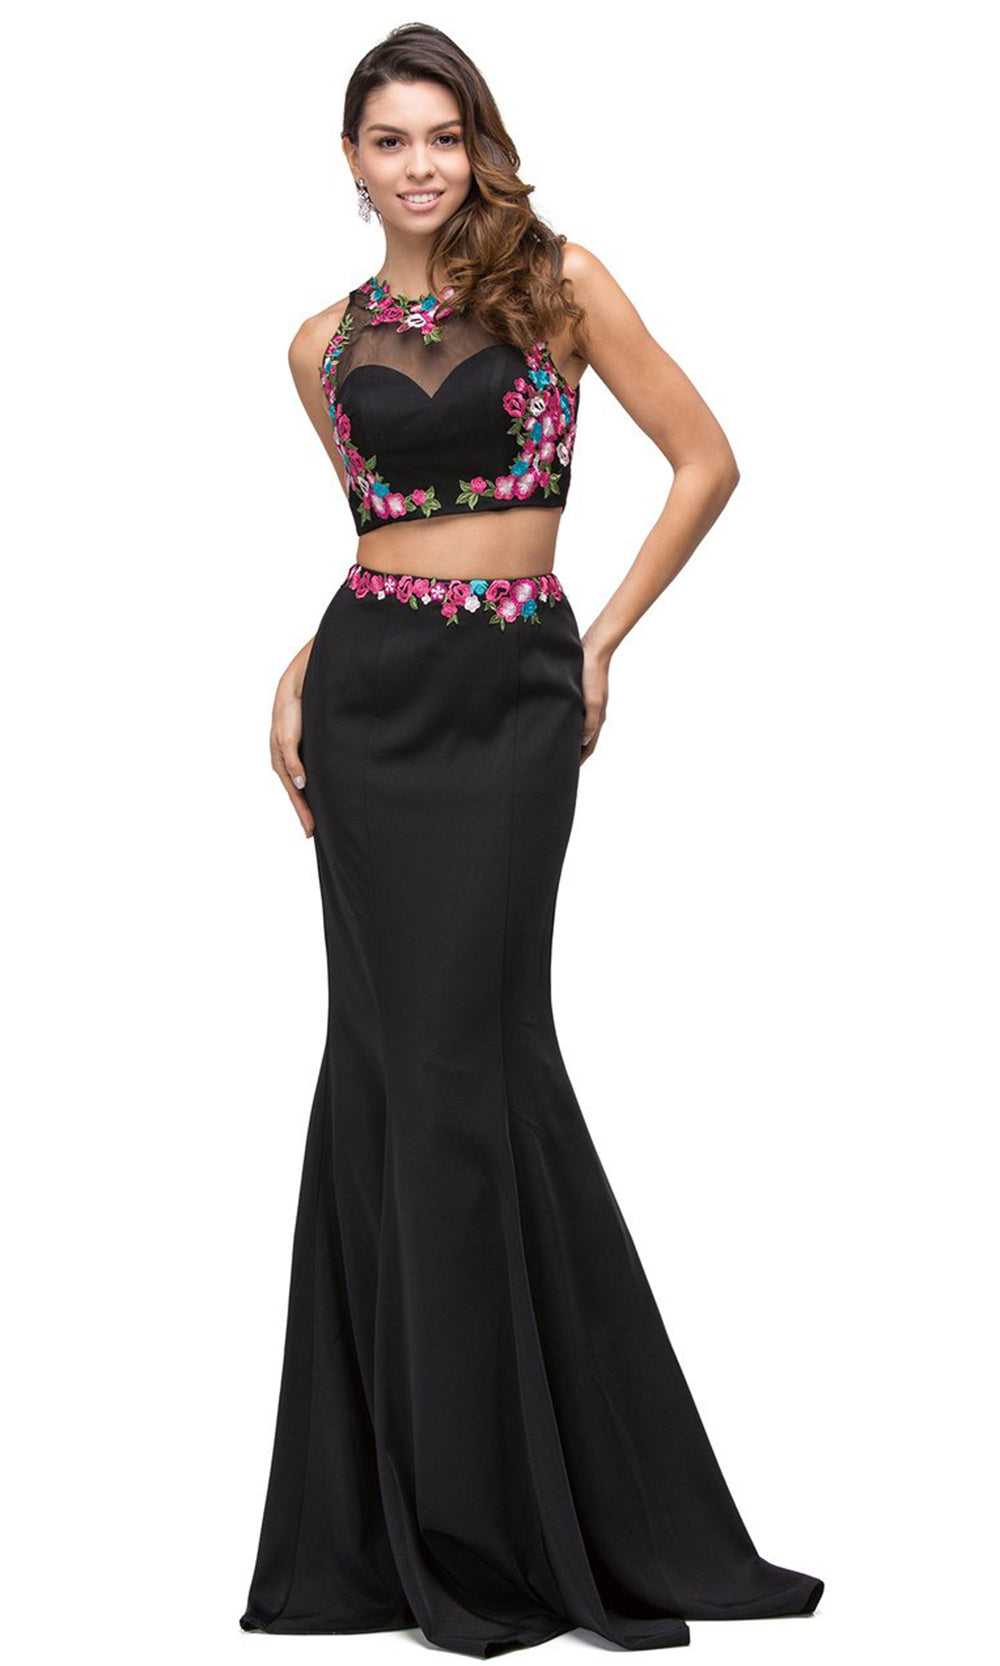 Dancing Queen - 9778 Two Piece Embroidered Mermaid Dress In Black and Pink